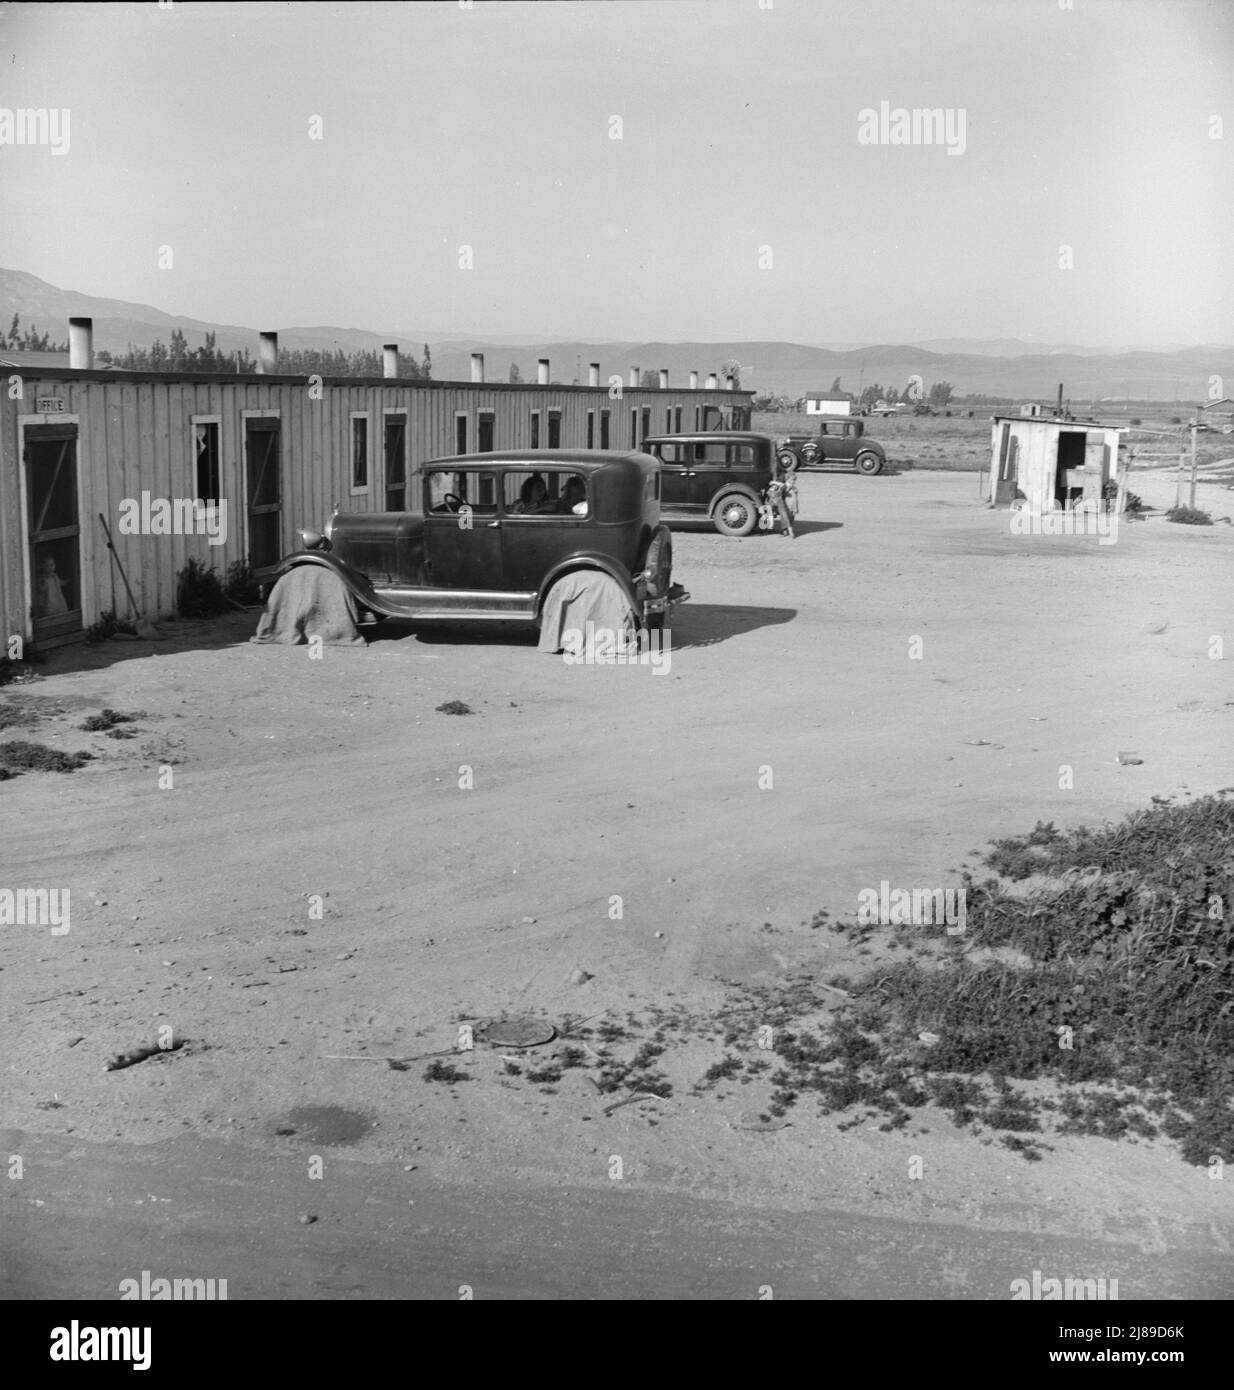 Arkansawyers auto camp. Ten cabins which rent for ten dollars a month with iron bed and electric light, one room. Greenfield, Salinas Valley, California. [Very basic accommodation for farm workers from the state of Arkansas]. Stock Photo